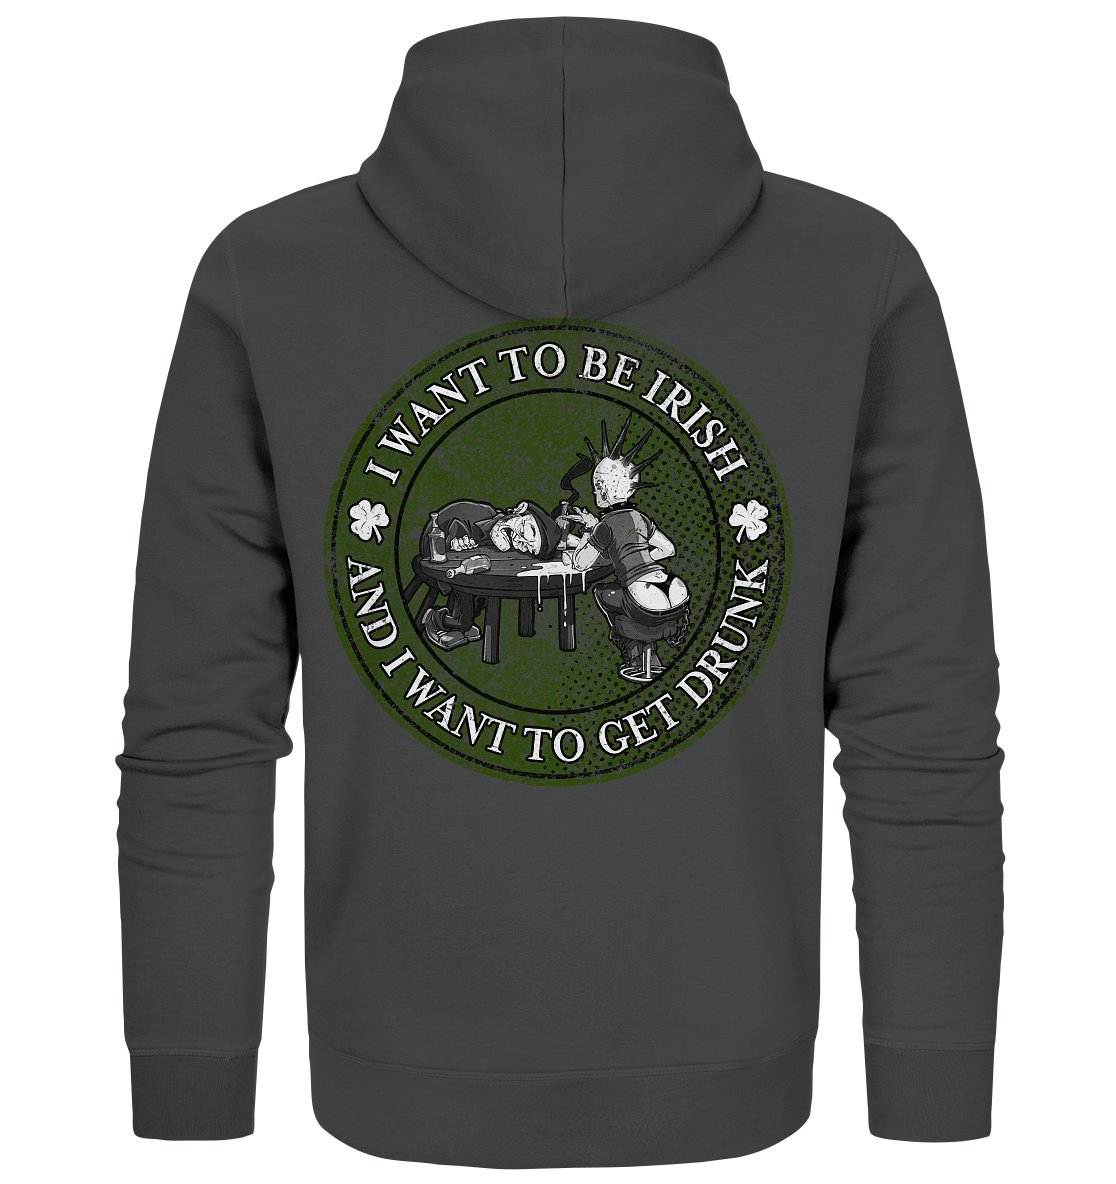 I Want To Be Irish And I Want To Get Drunk - Organic Zipper